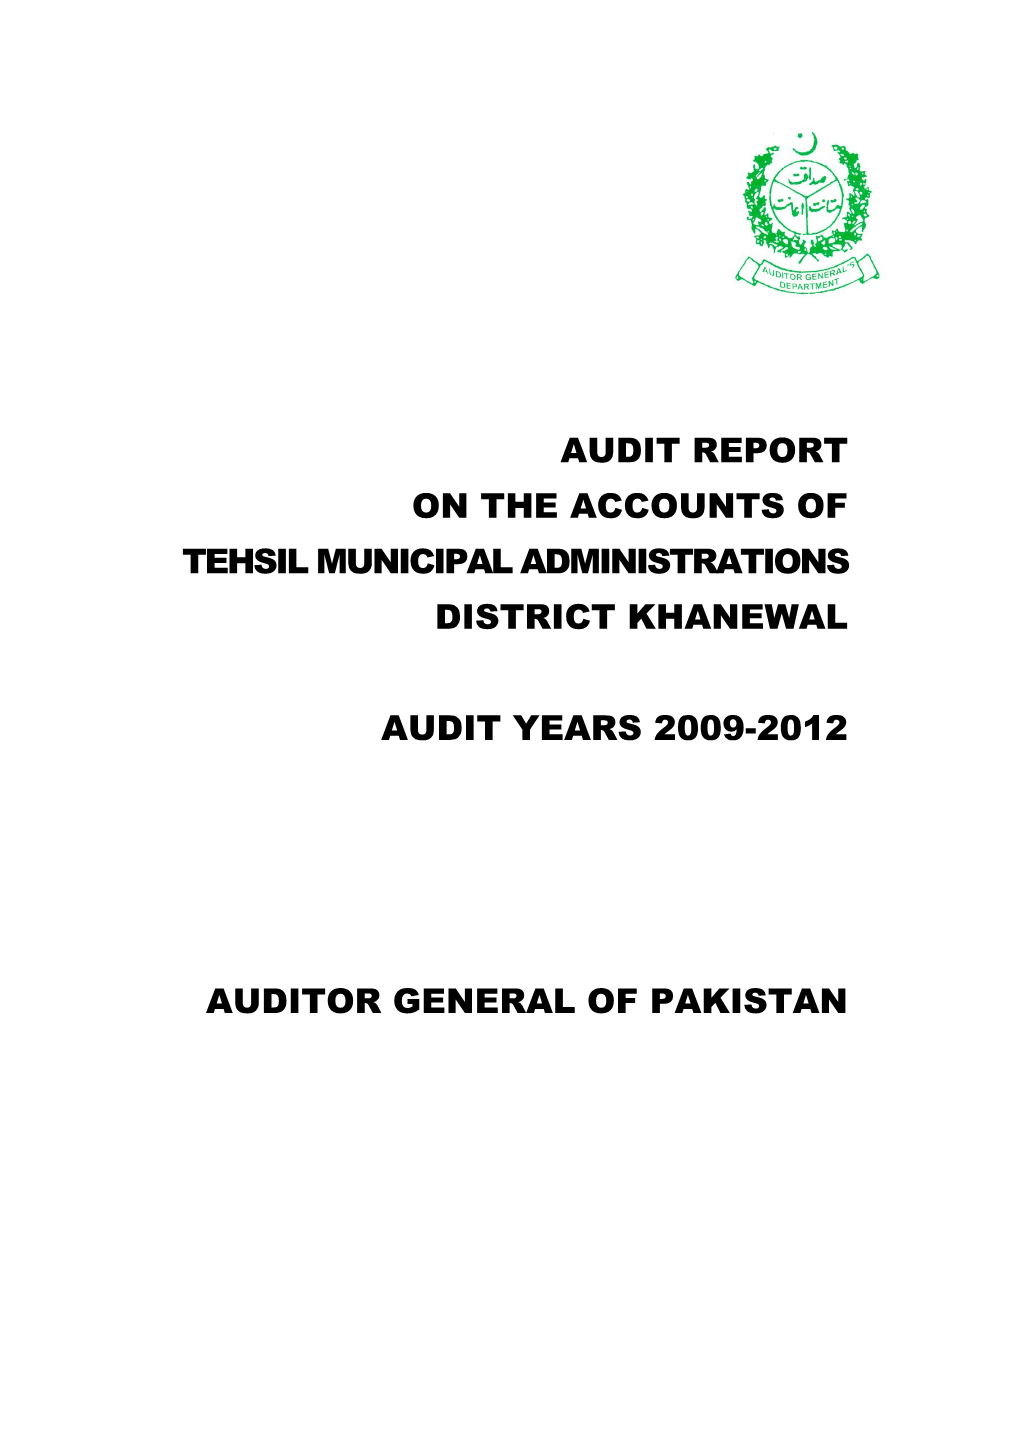 Audit Report on the Accounts of Tehsil Municipal Administrations District Khanewal